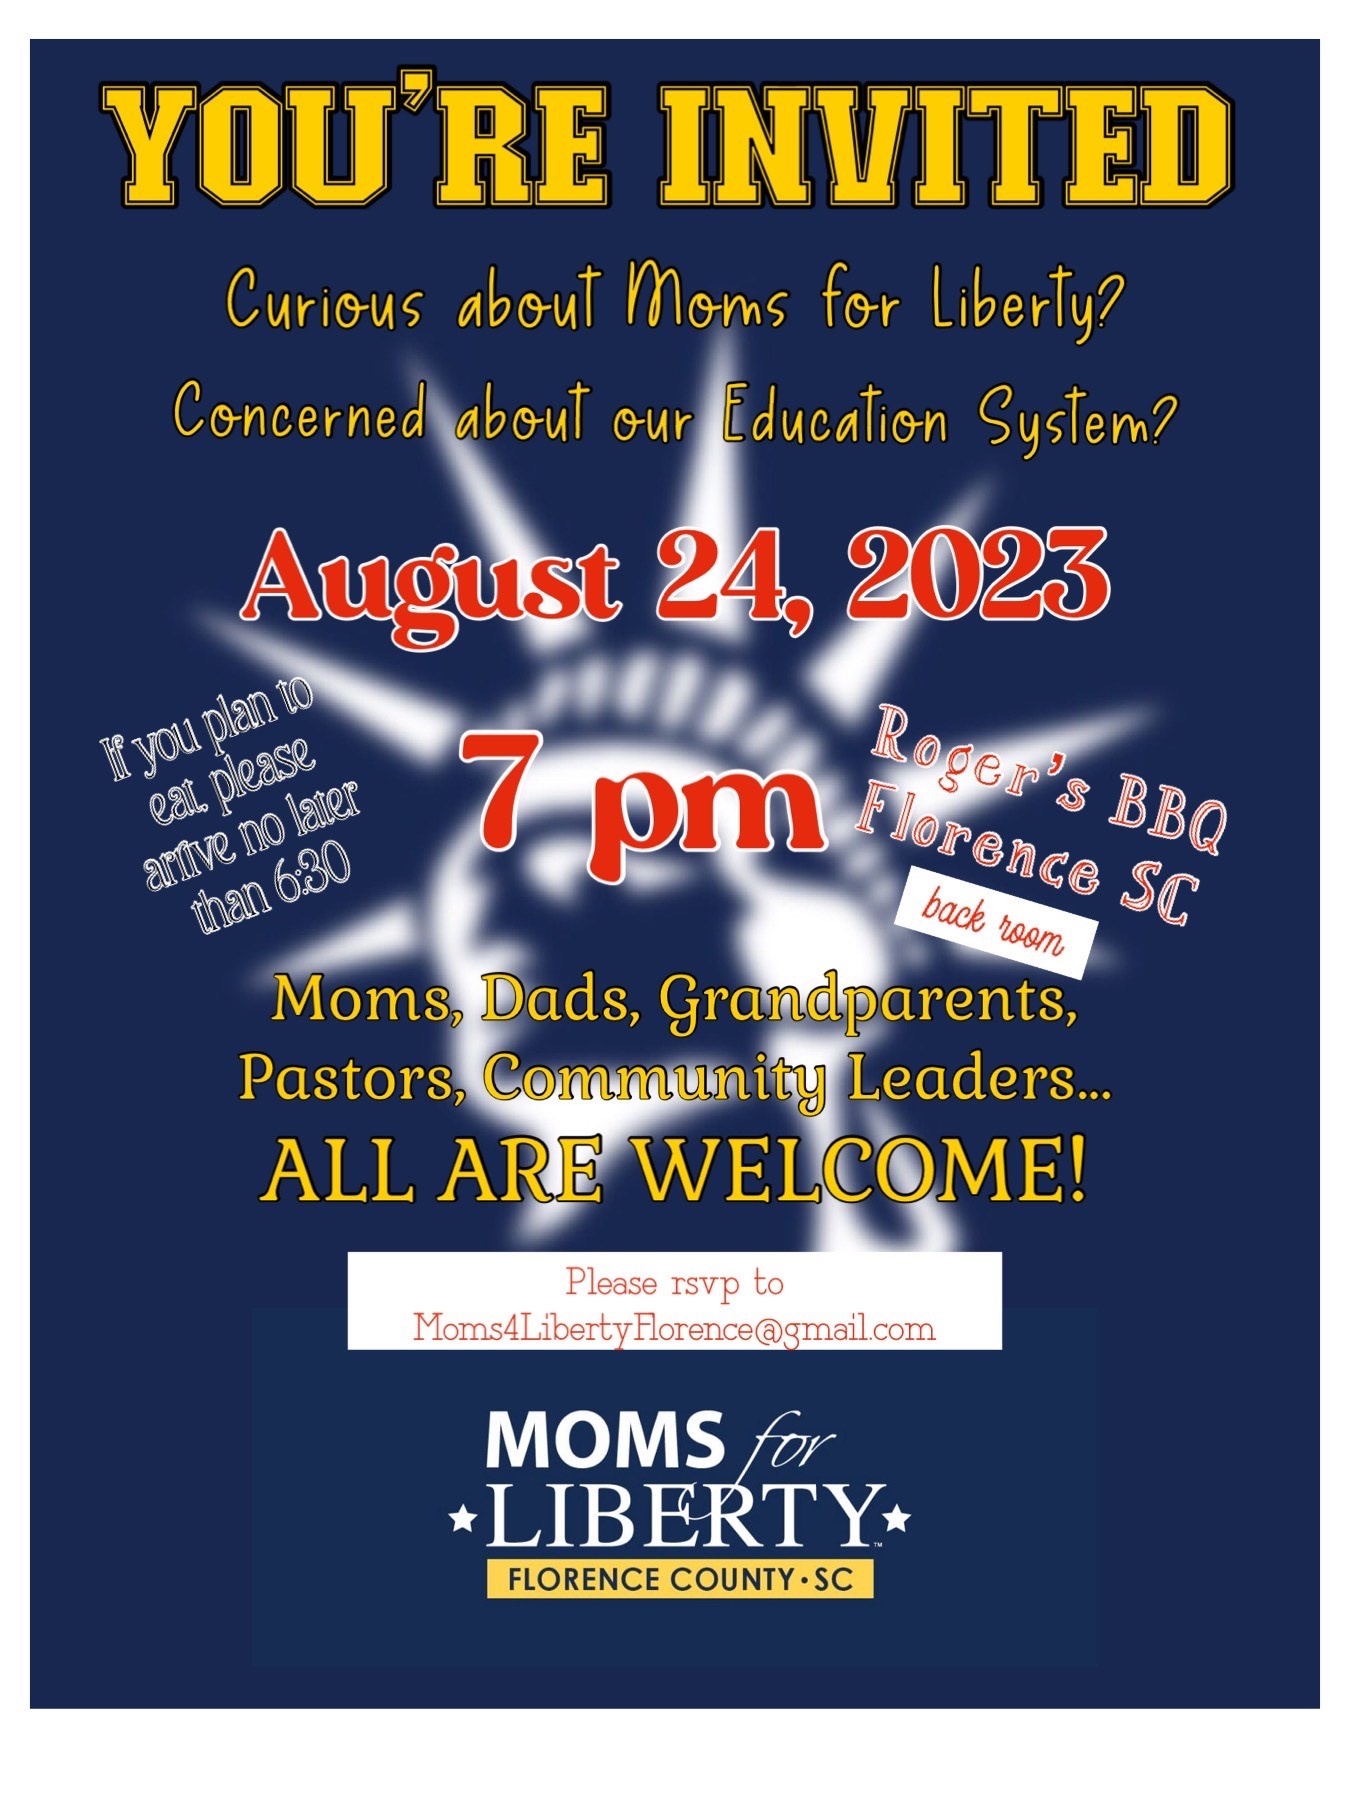 Moms for Liberty - Florence County SC Chapter meeting